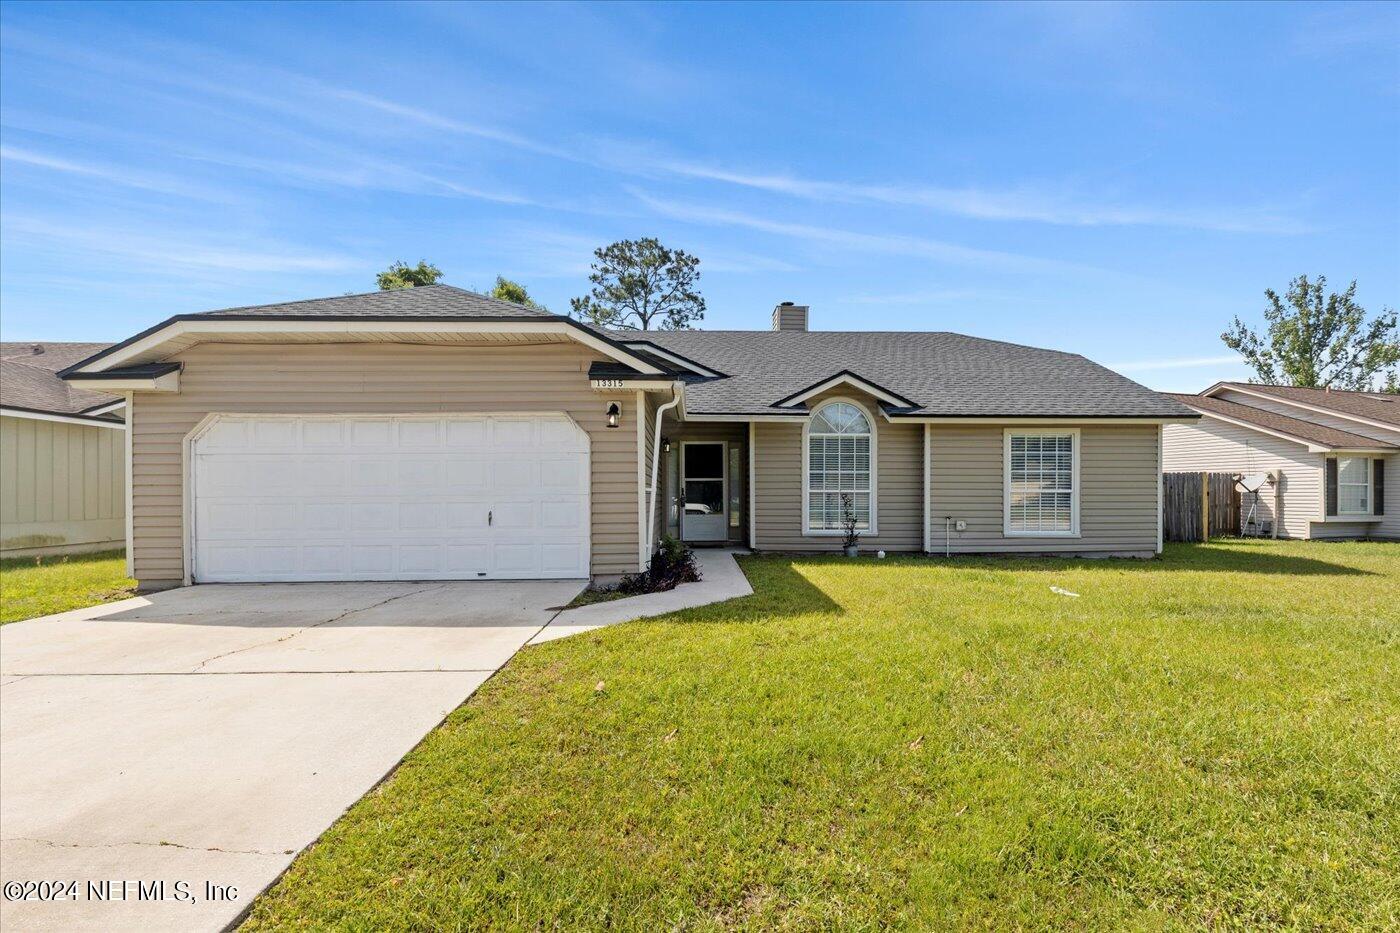 Jacksonville, FL home for sale located at 13315 Currituck Drive N, Jacksonville, FL 32225